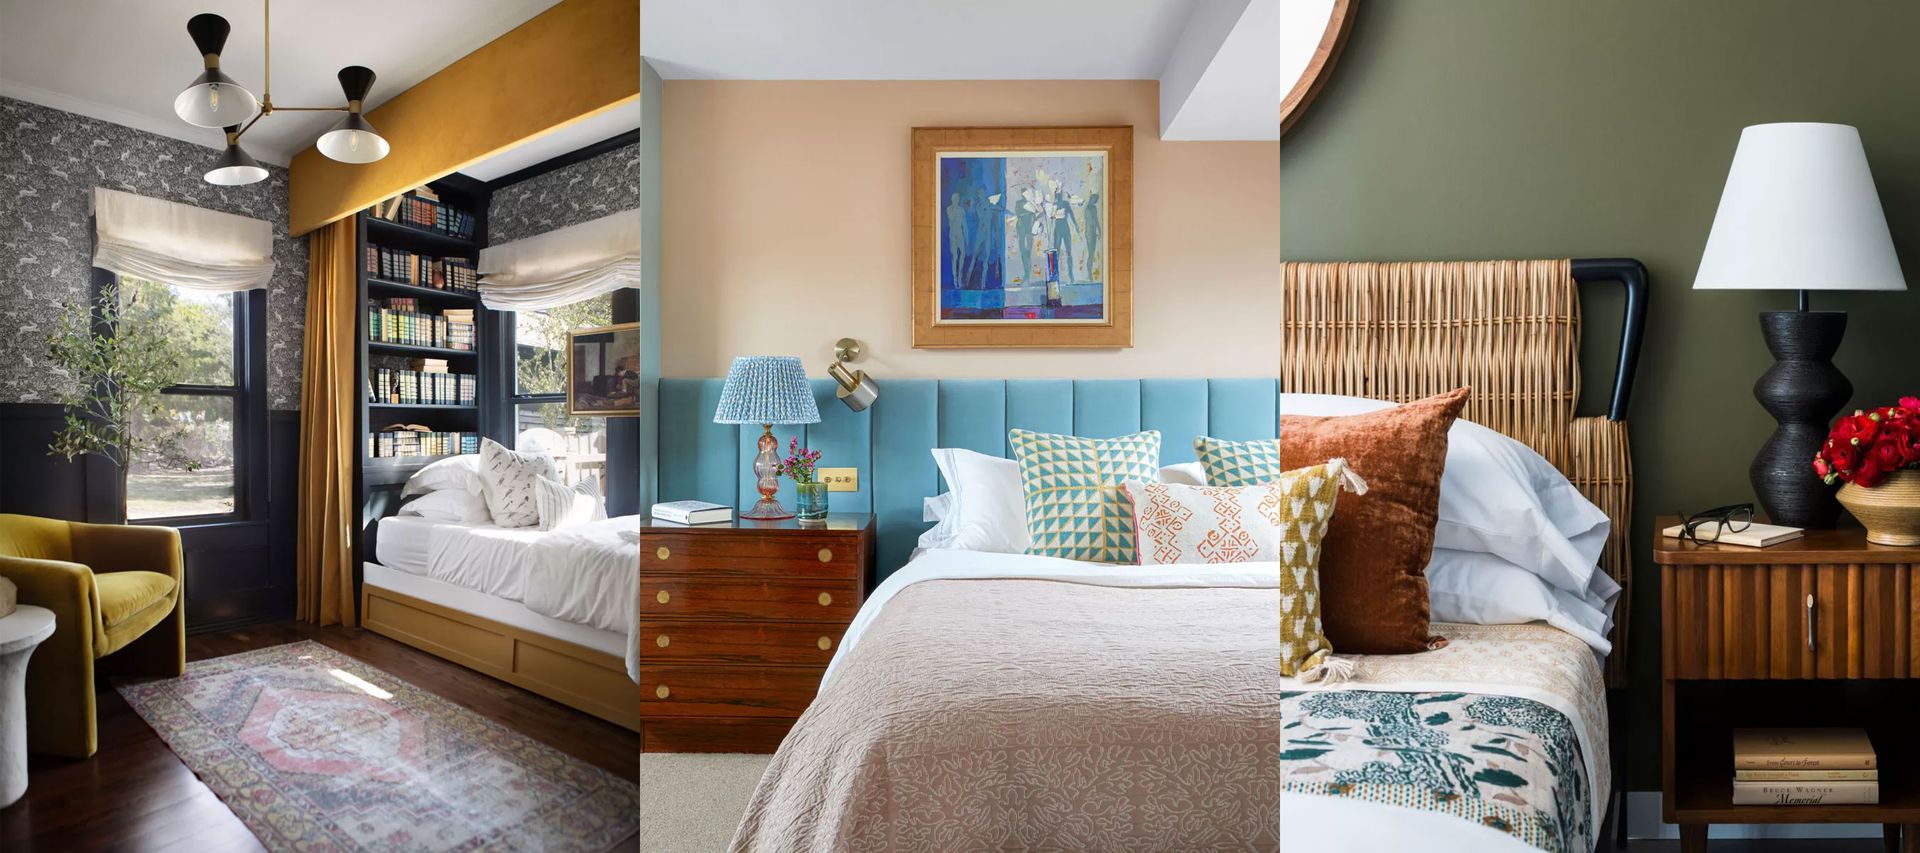 6 outdated bedroom trends designers urge us to avoid at all costs